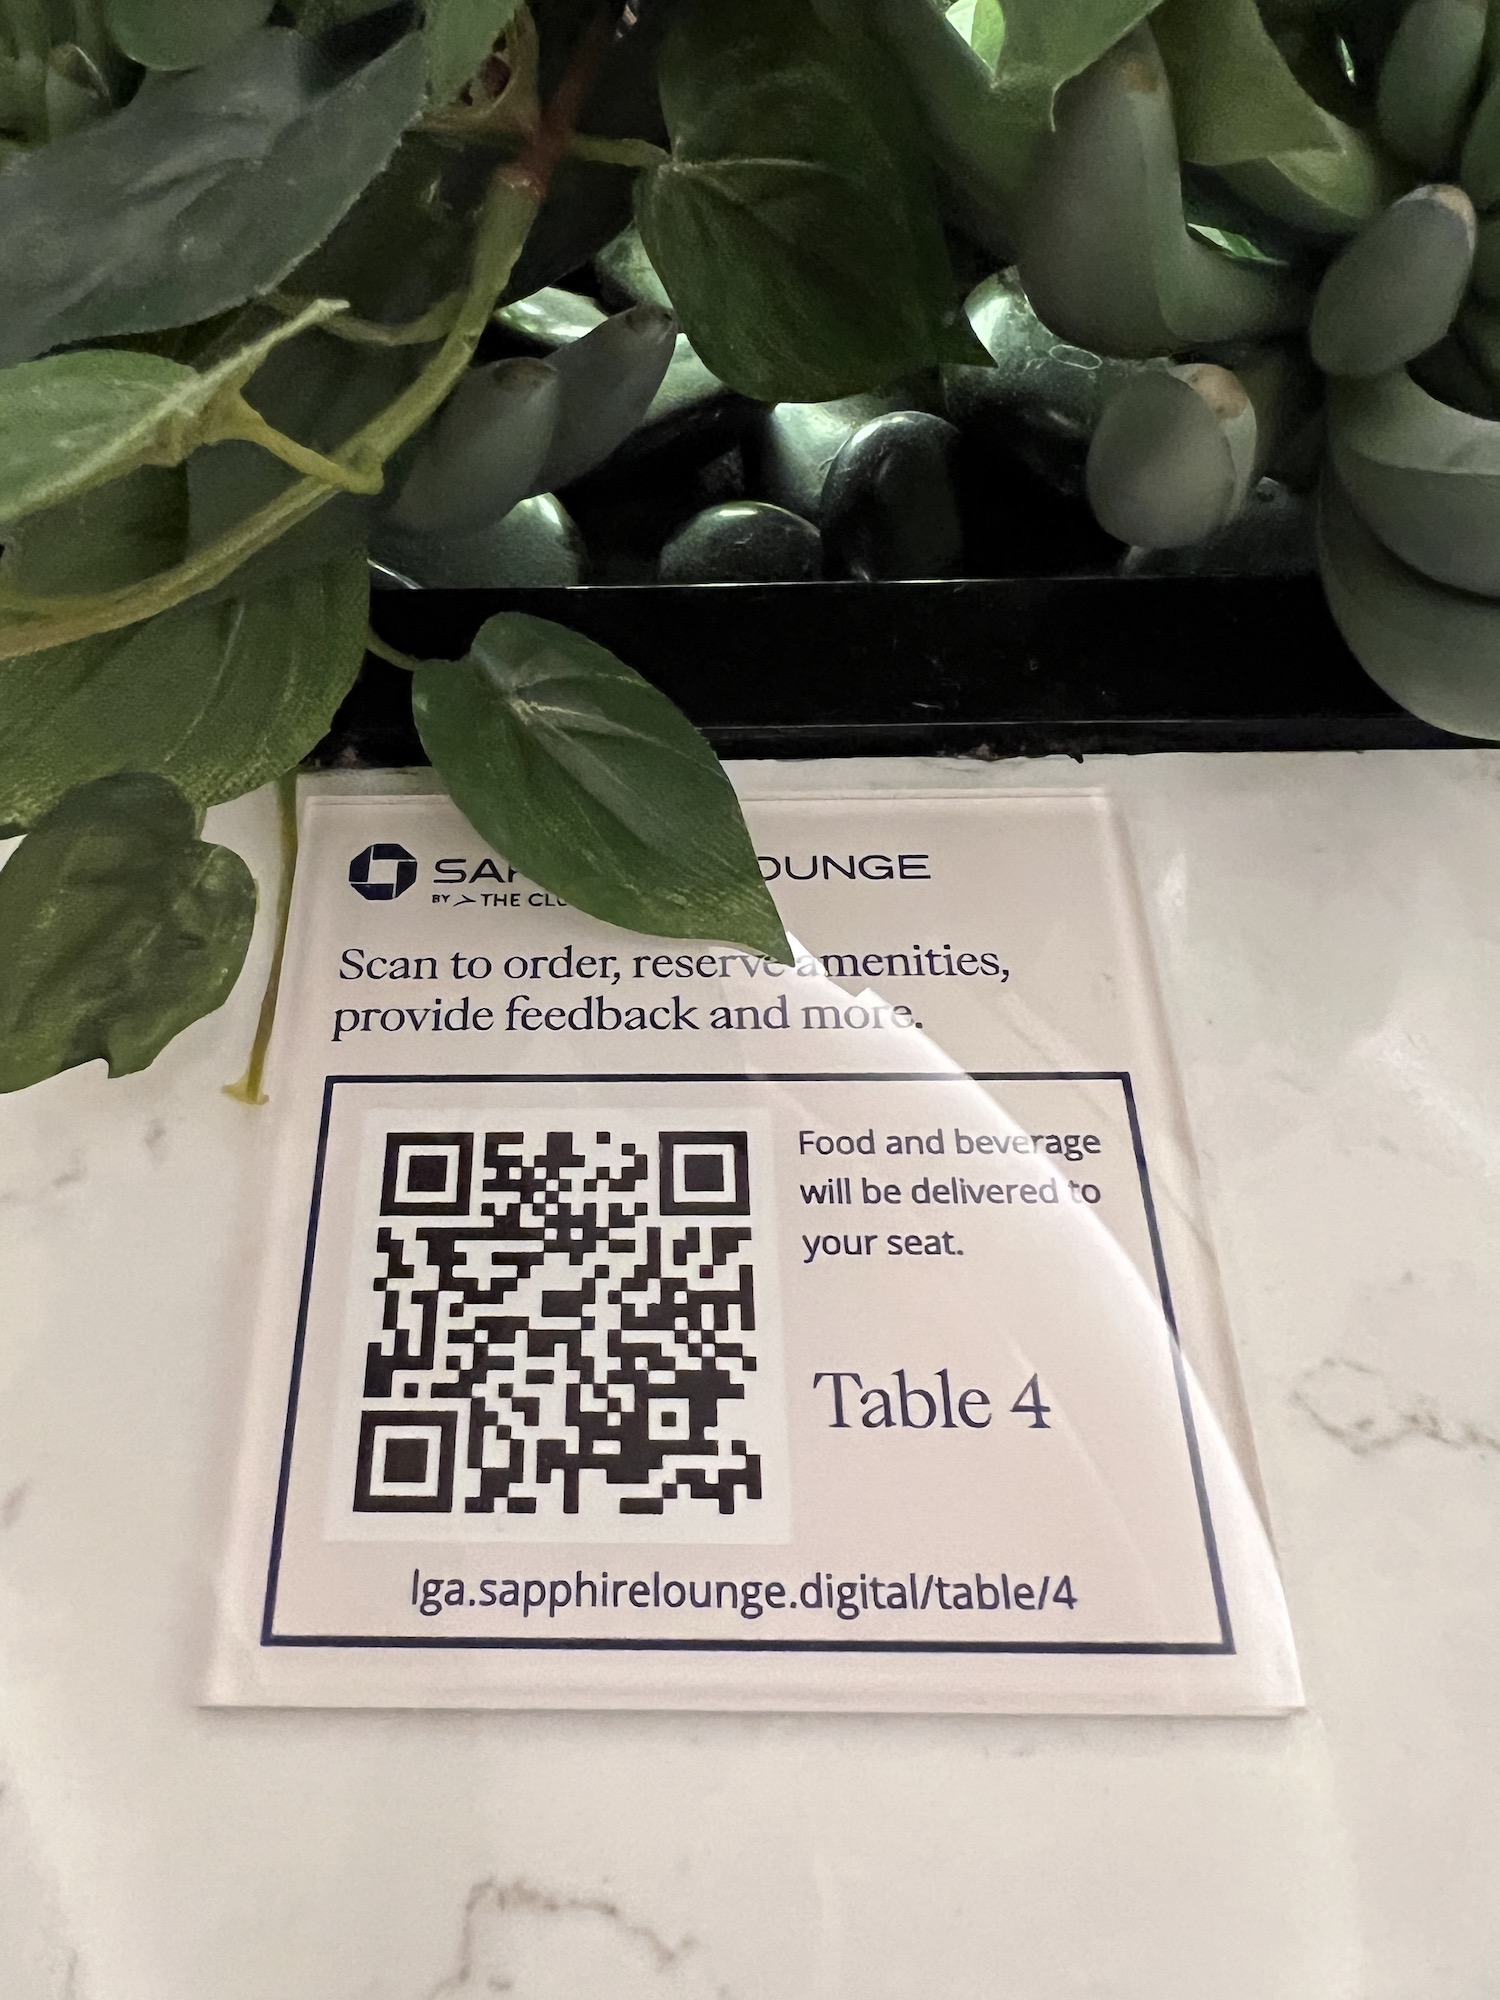 Chase Sapphire Lounge at LaGuardia (LGA) by The Club - Order by QR Code